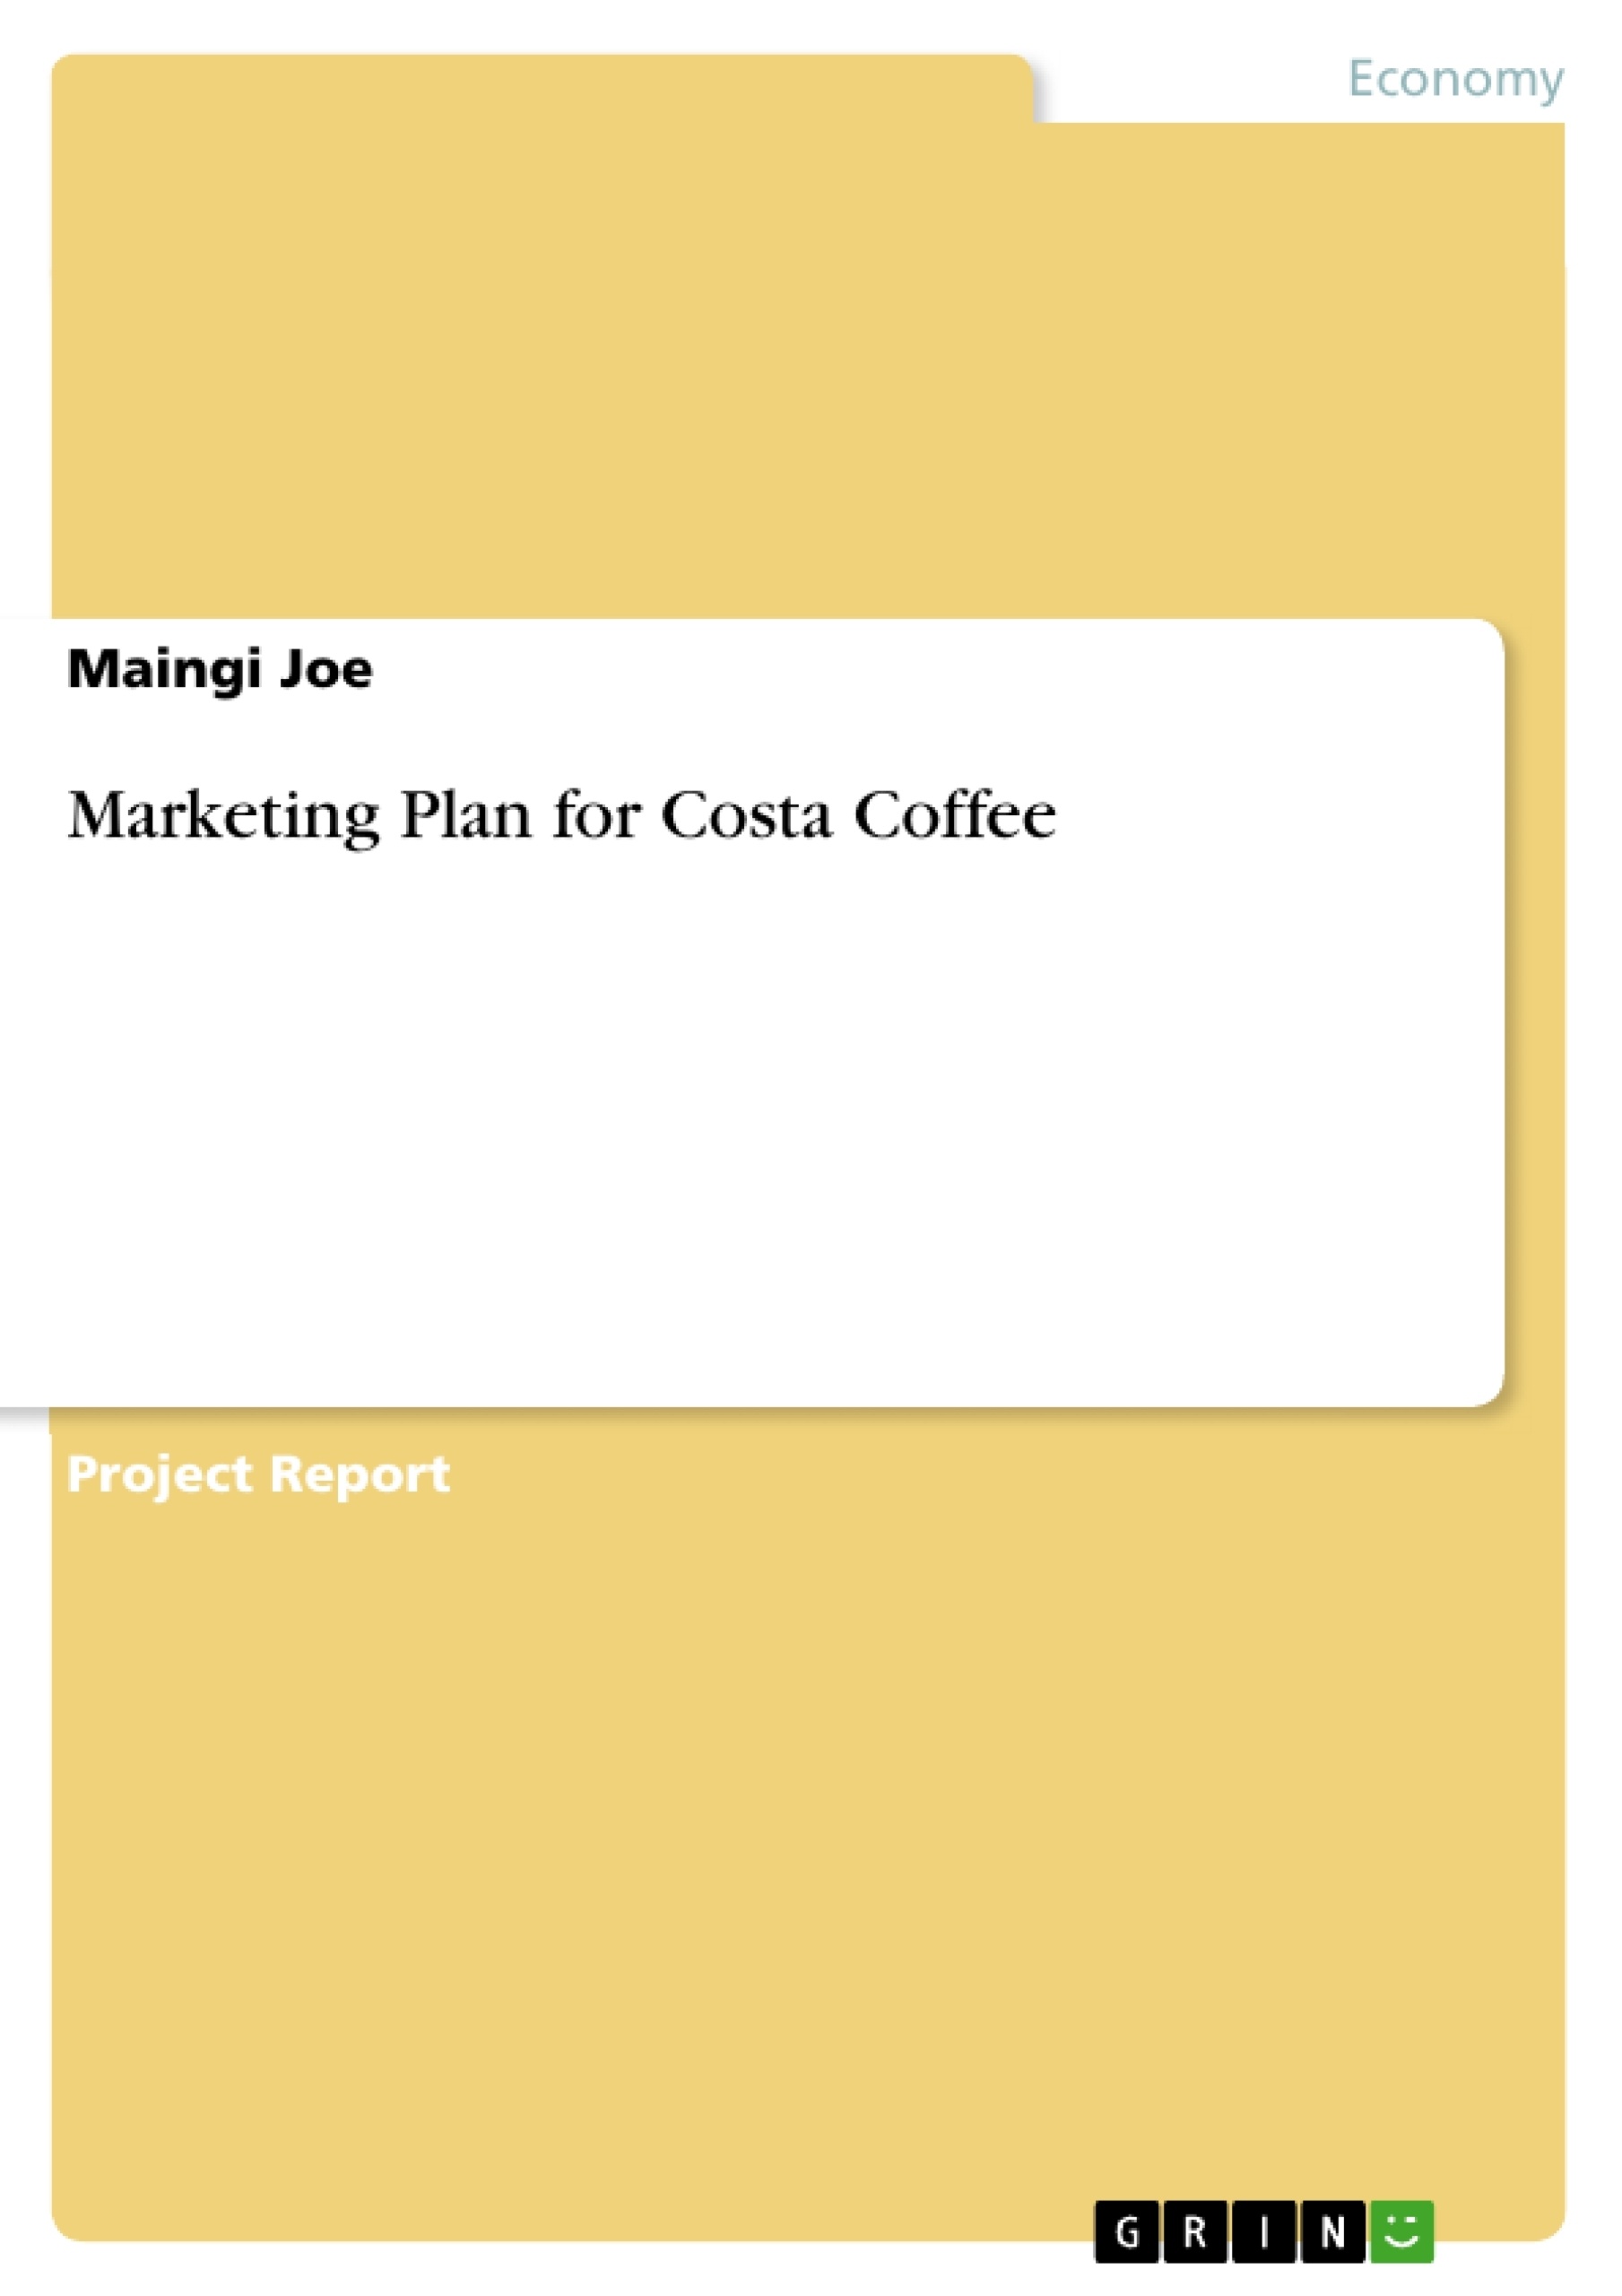 Title: Marketing Plan for Costa Coffee